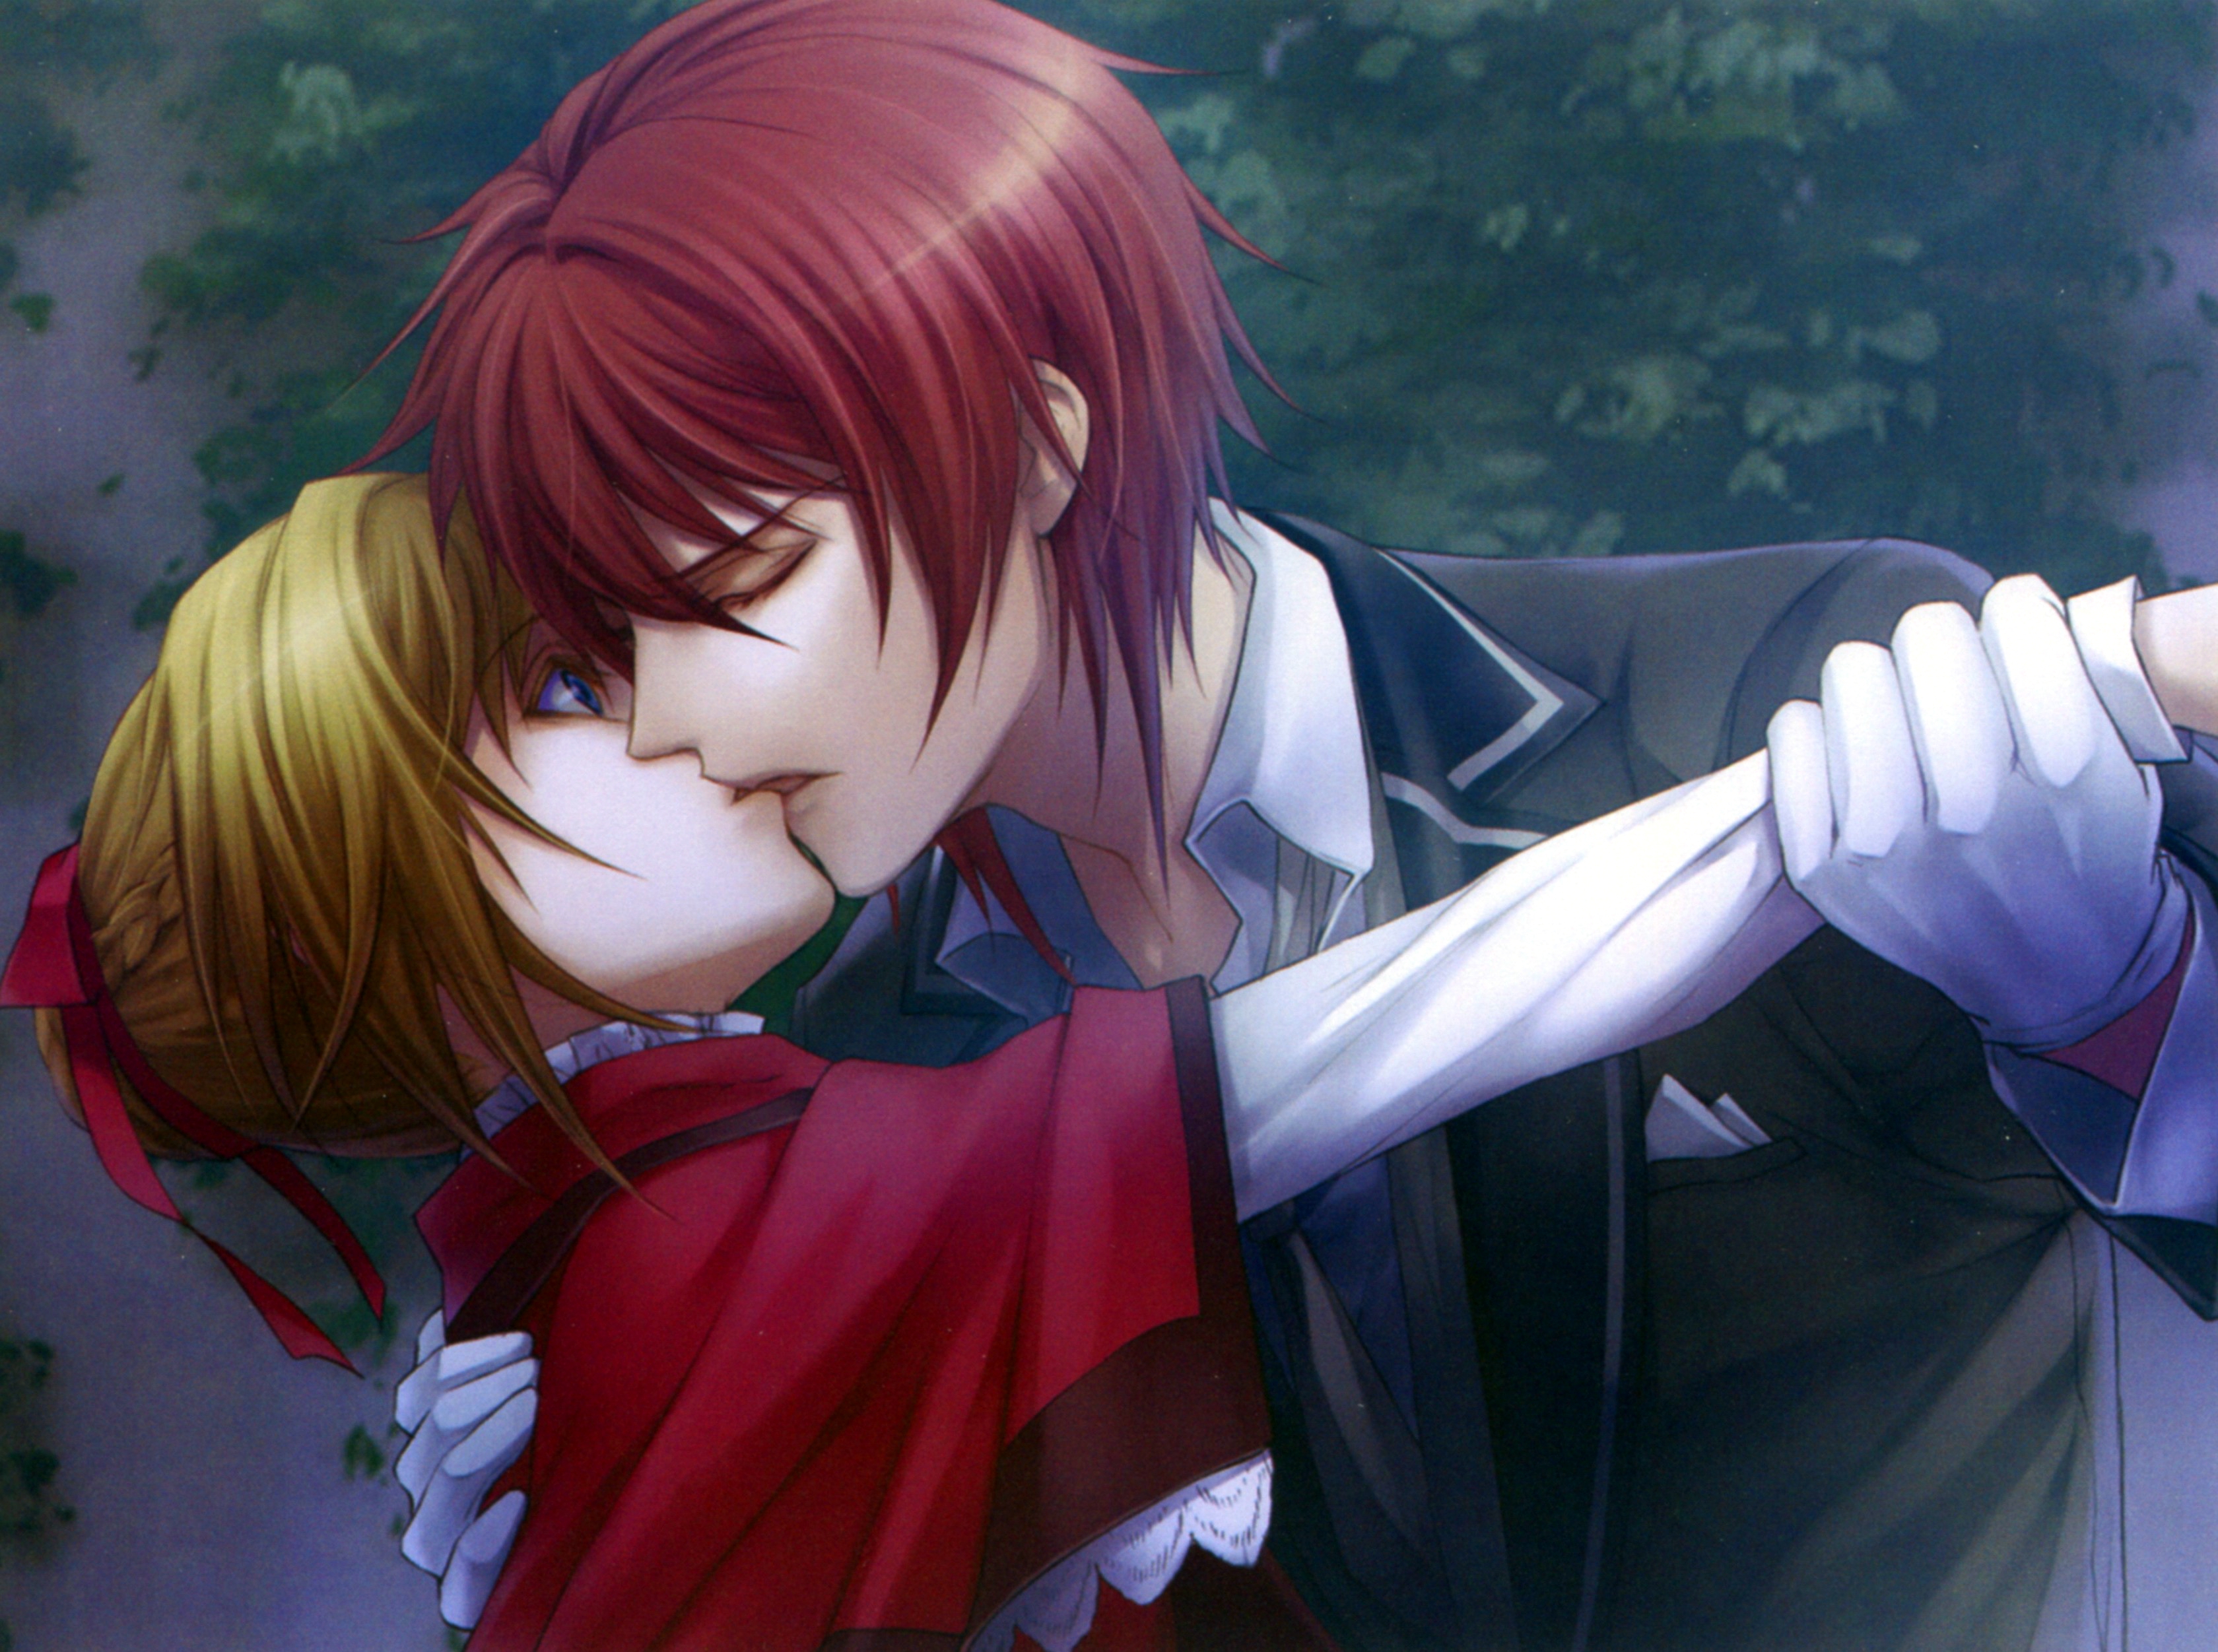 Otome Games ♡ Images on Fanpop.